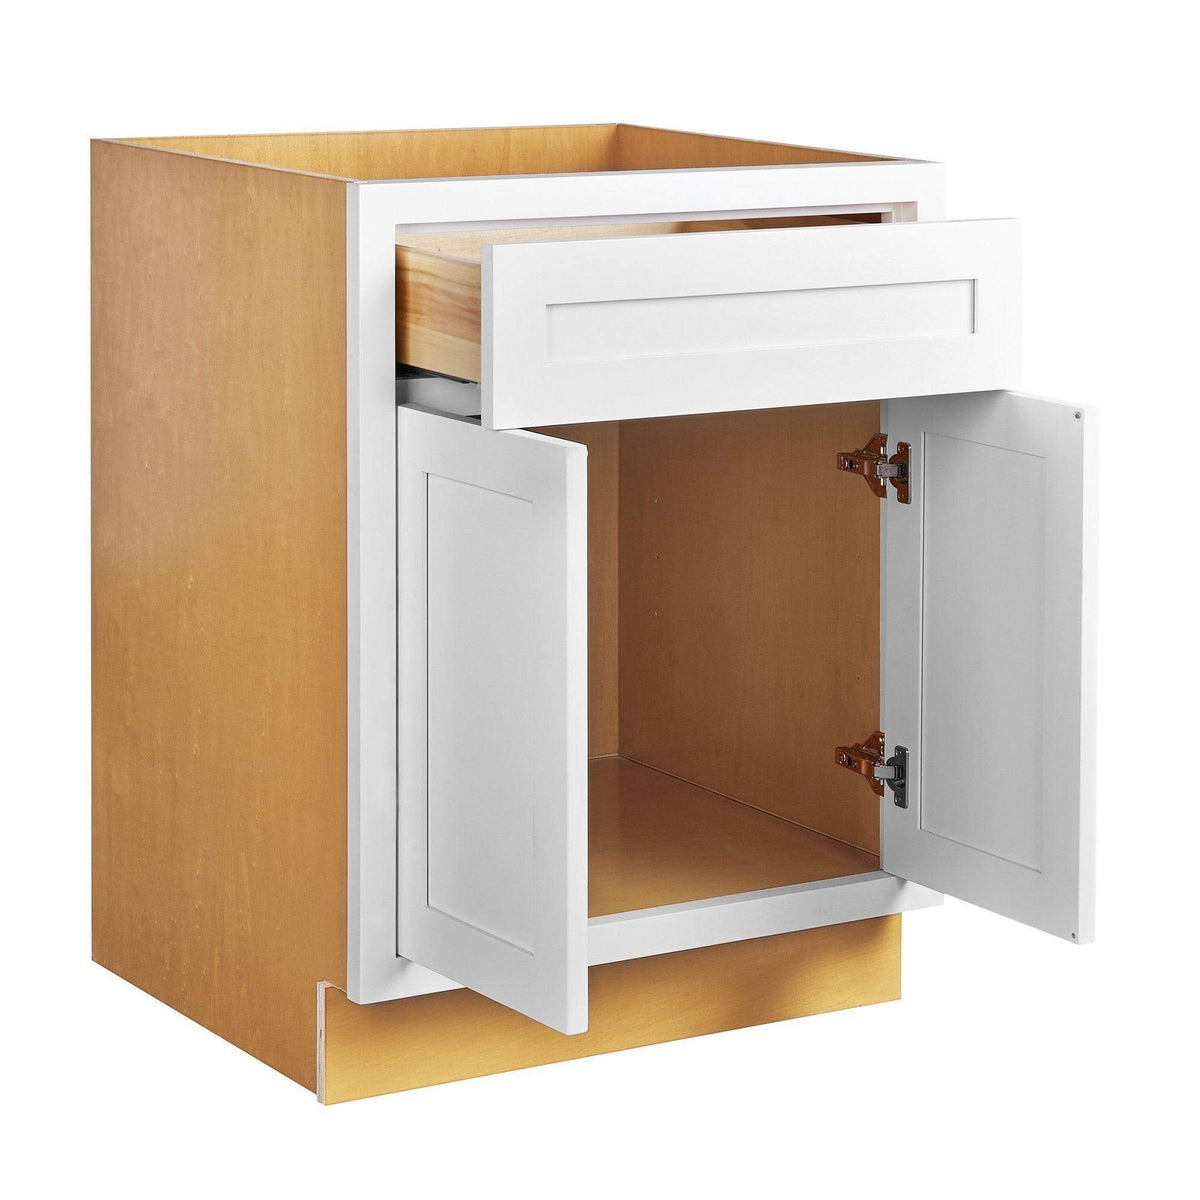 Snow White Inset Shaker Base Cabinet - Double Door 30